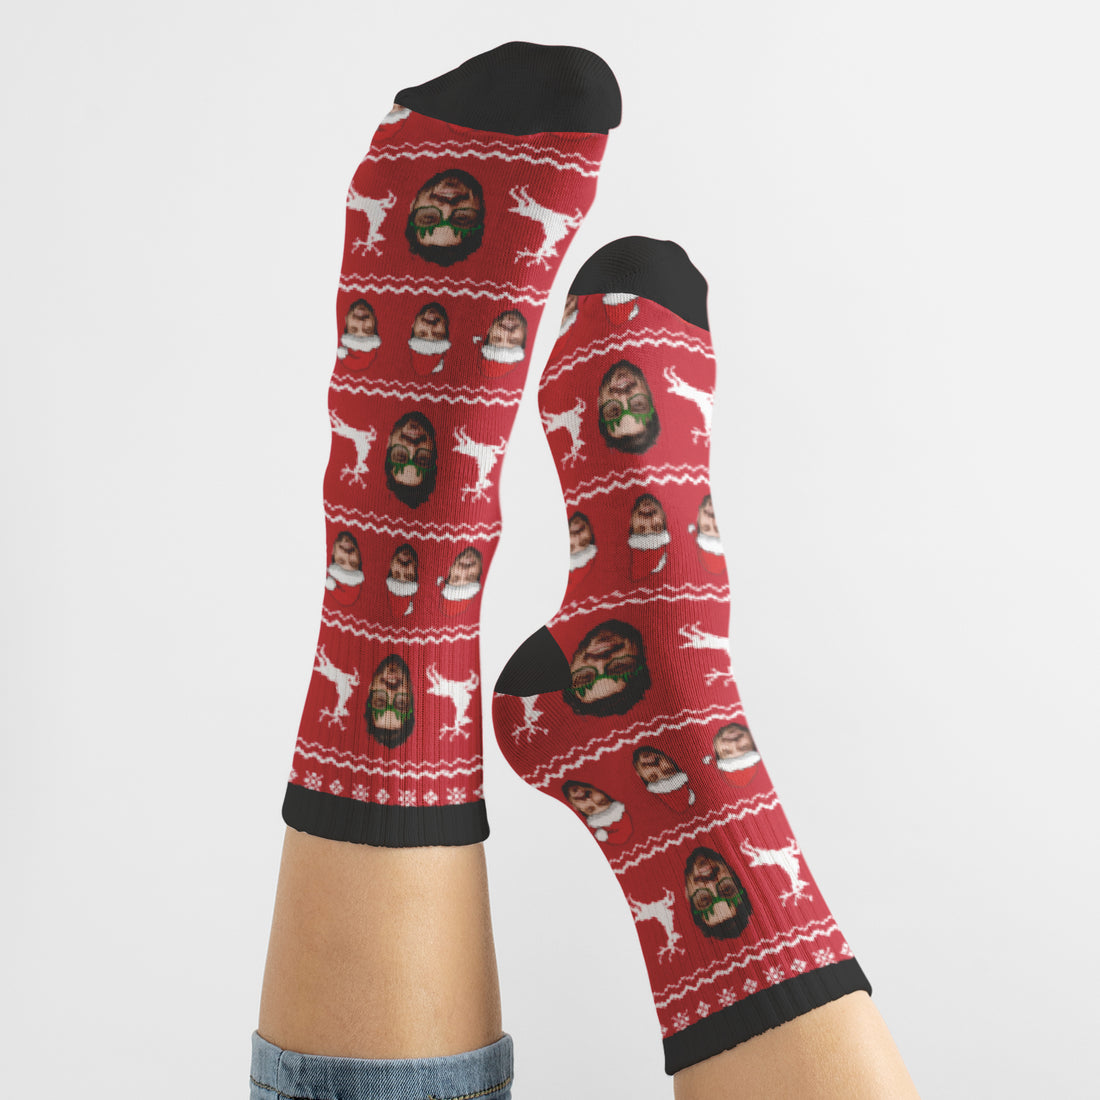 Personalized Face Christmas Socks